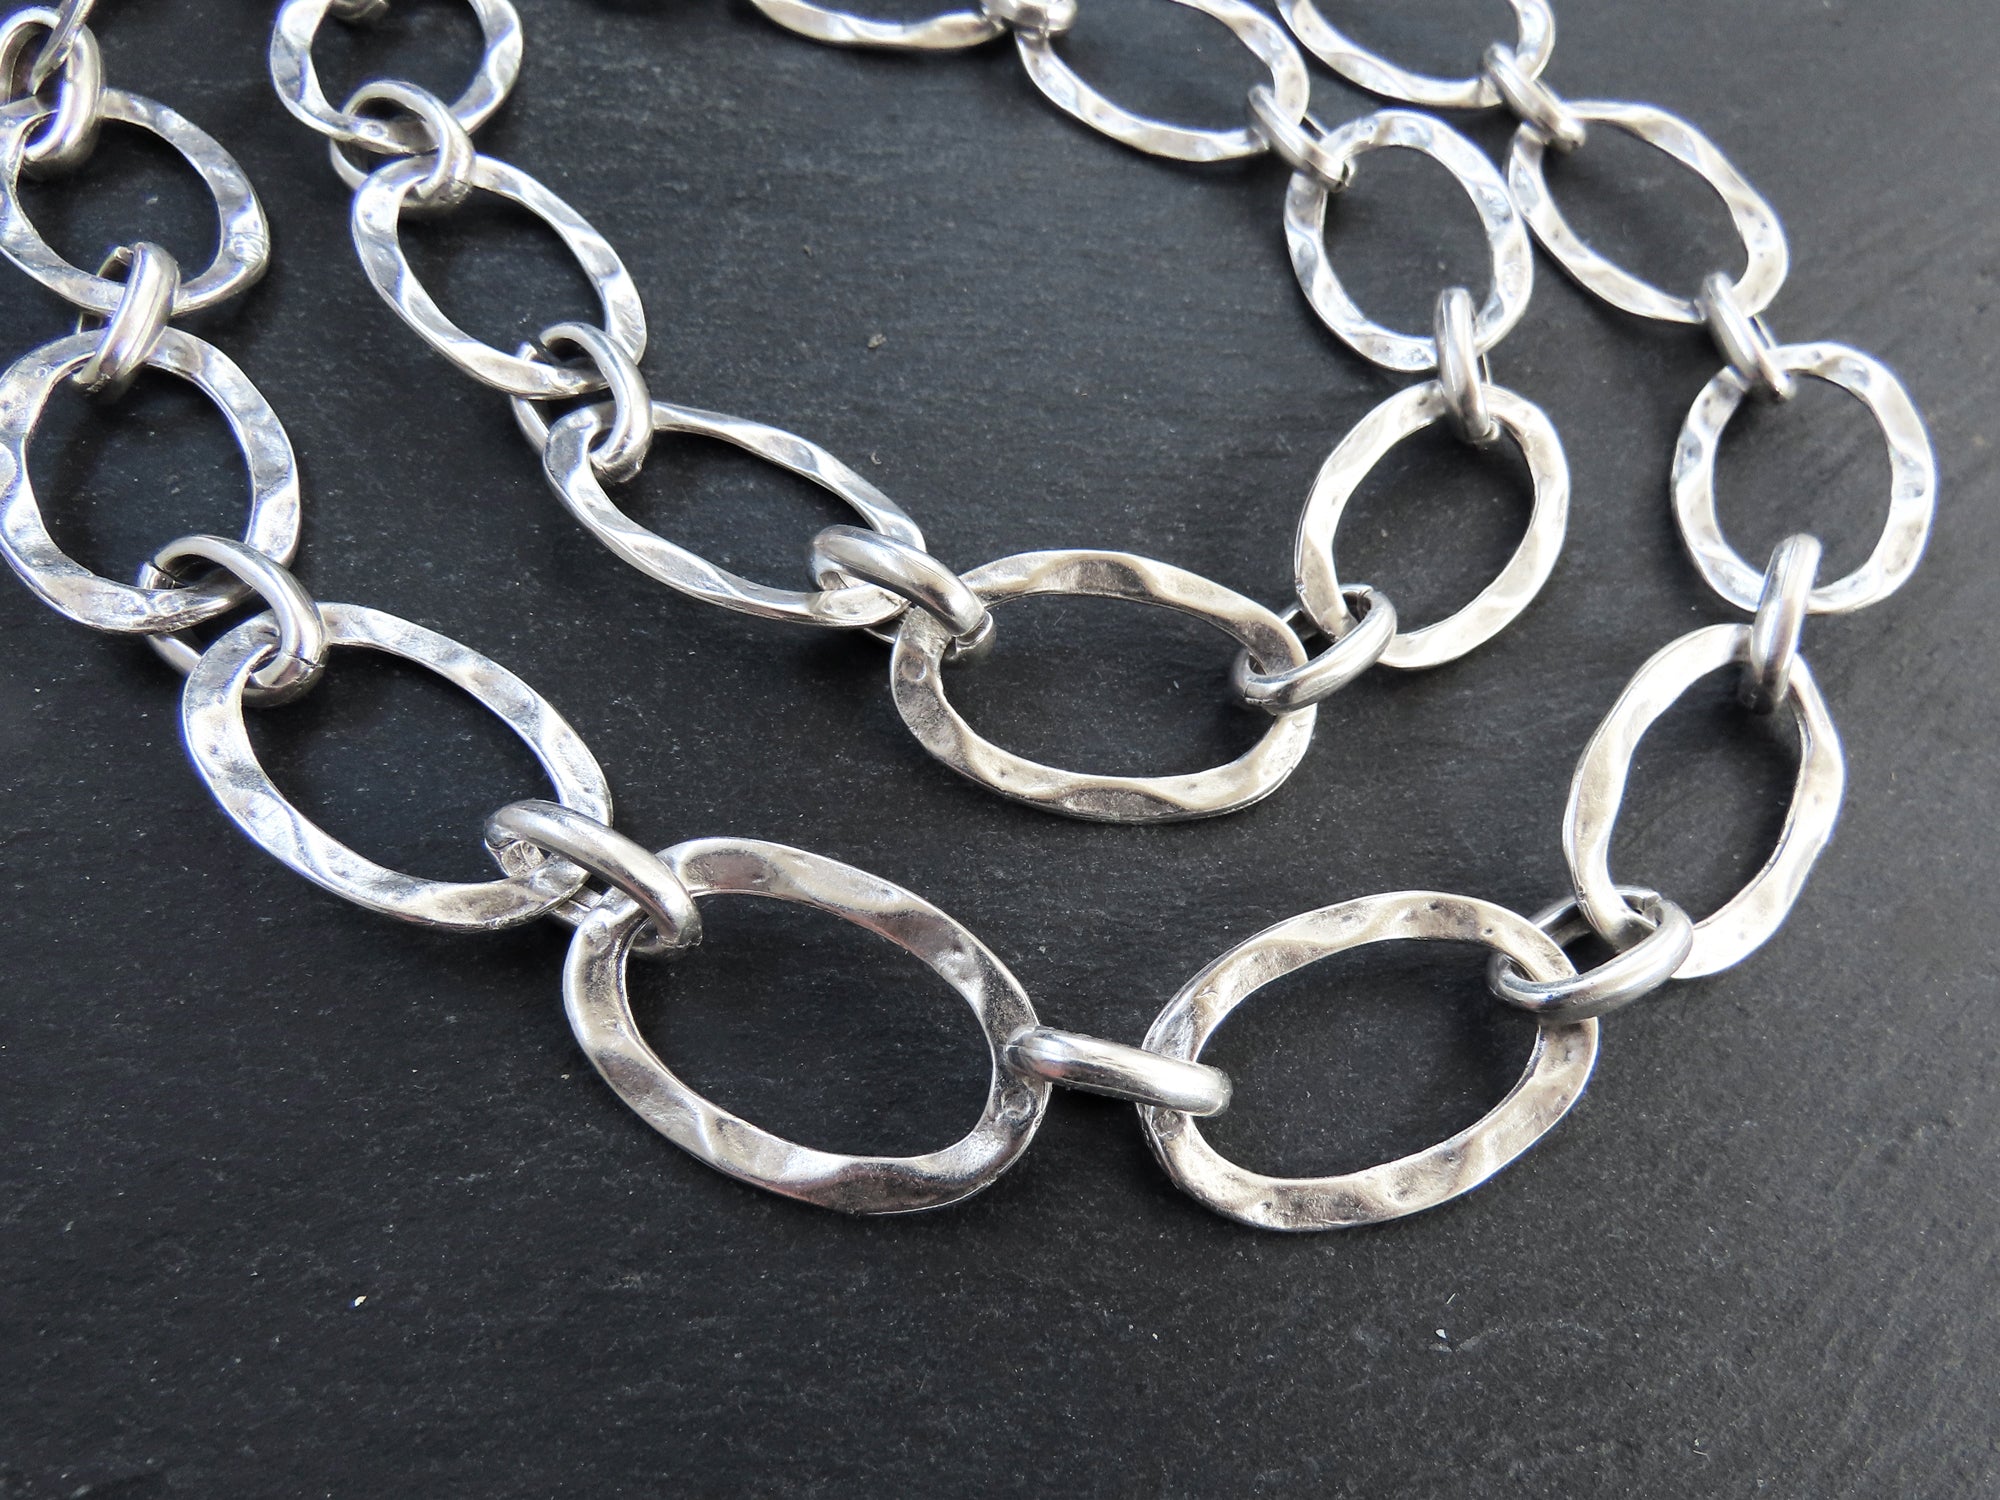 1Ft 7x5mm 925 Oxidized Silver Twisted Large Oval Link Chain By